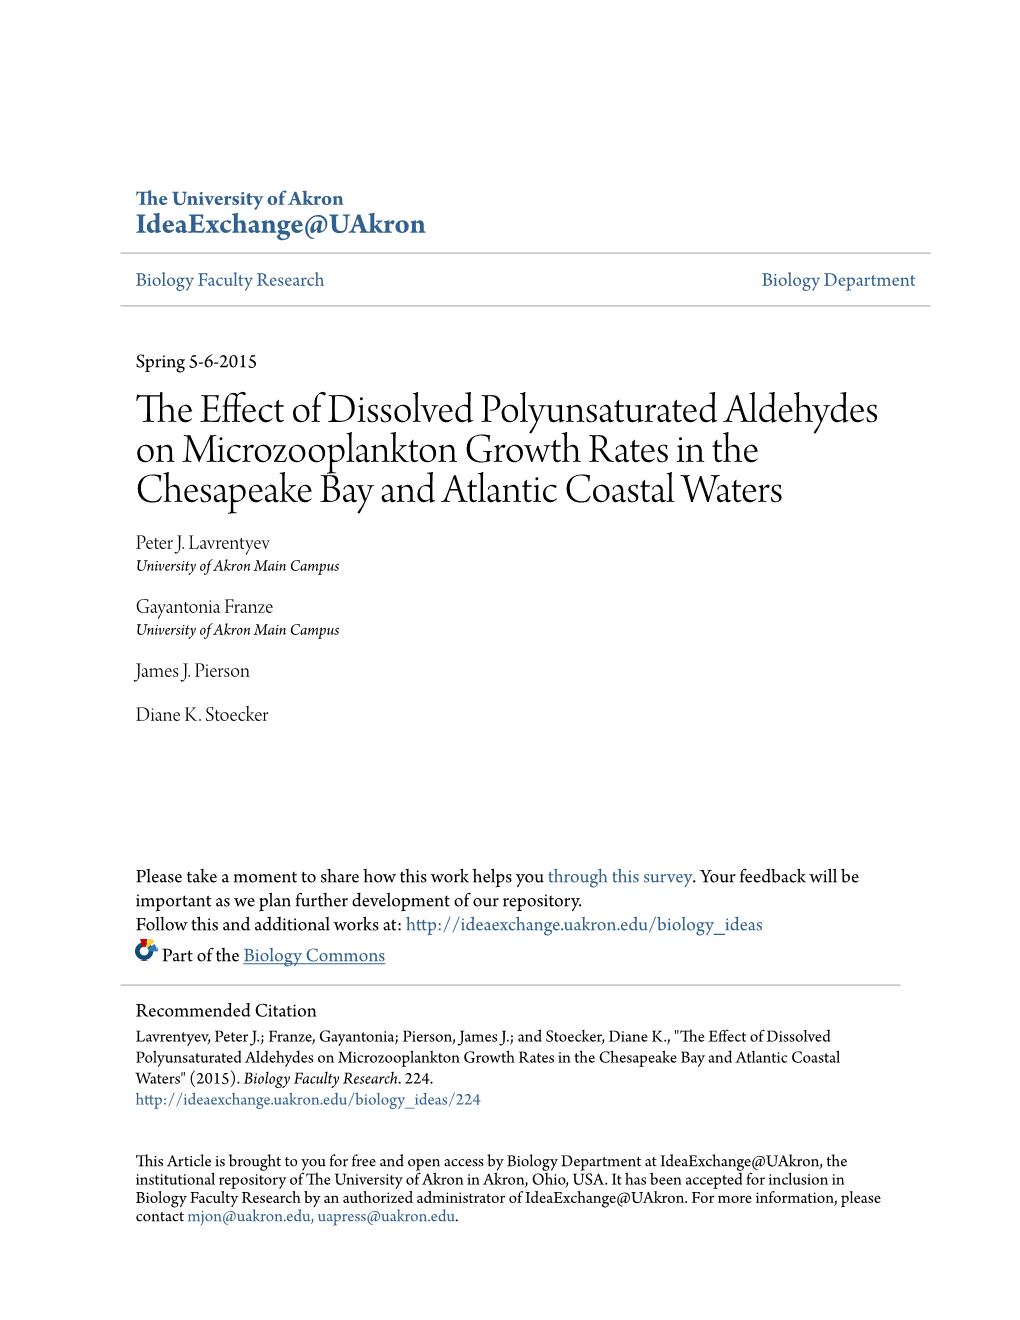 The Effect of Dissolved Polyunsaturated Aldehydes on Microzooplankton Growth Rates in the Chesapeake Bay and Atlantic Coastal Waters" (2015)